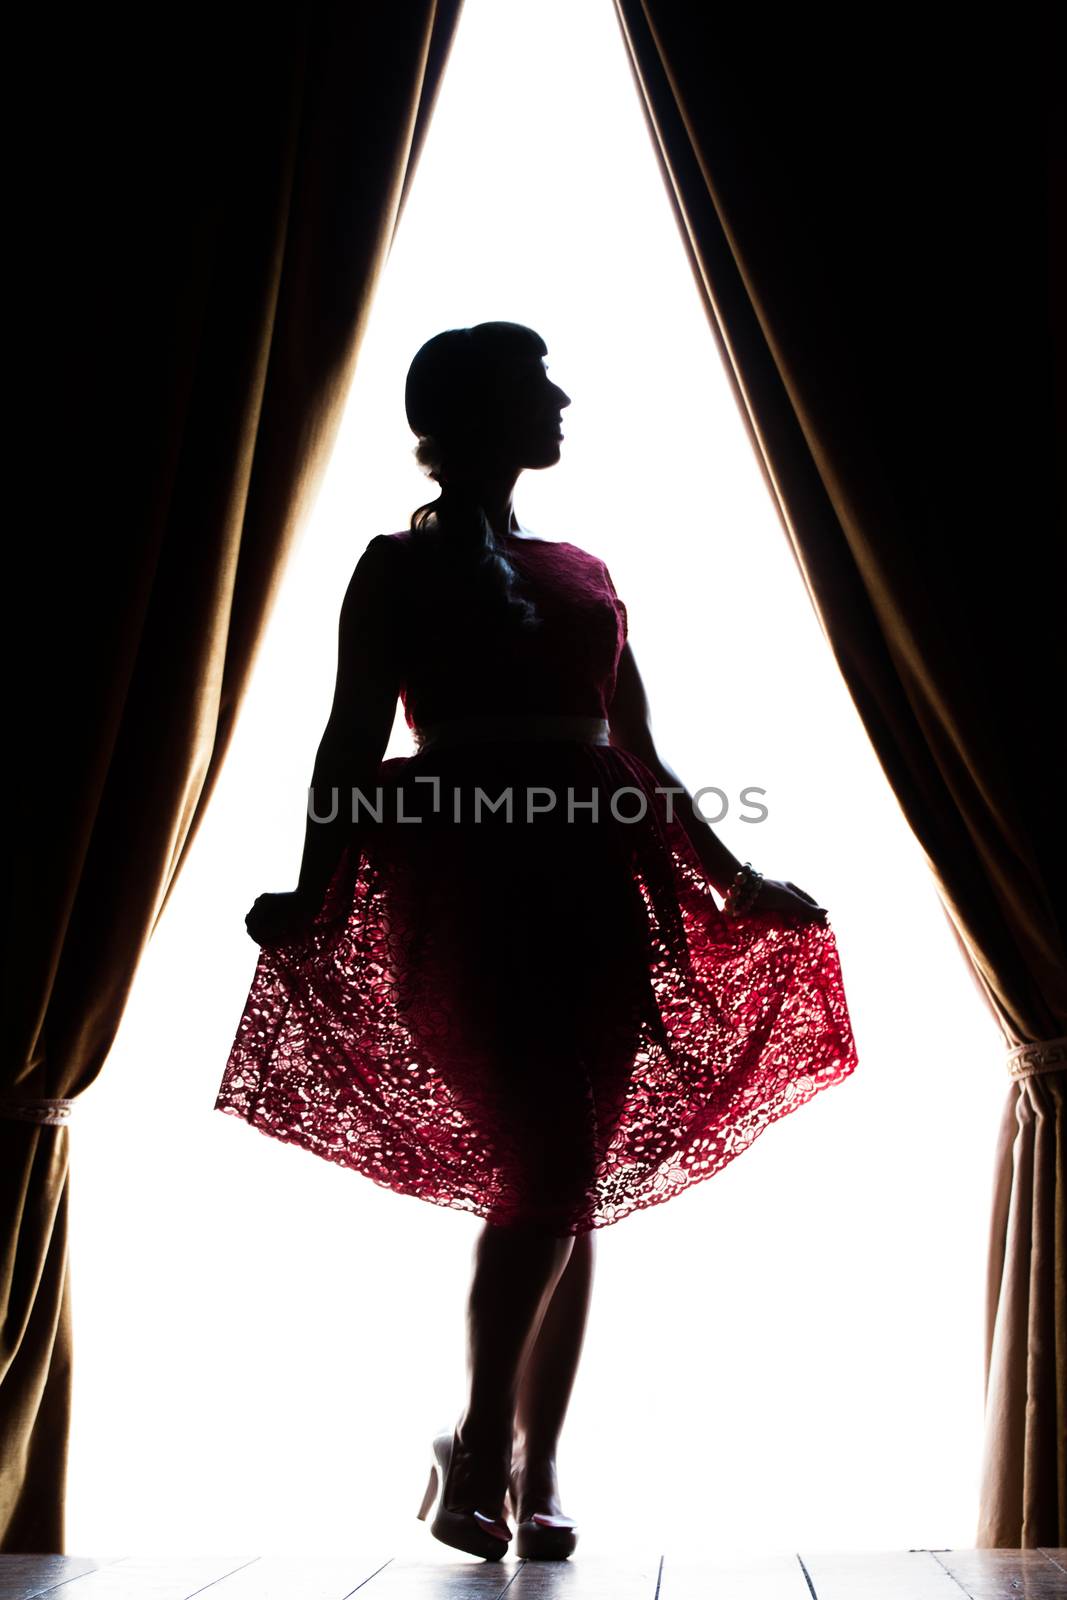 Silhouette of pinup girl by membio